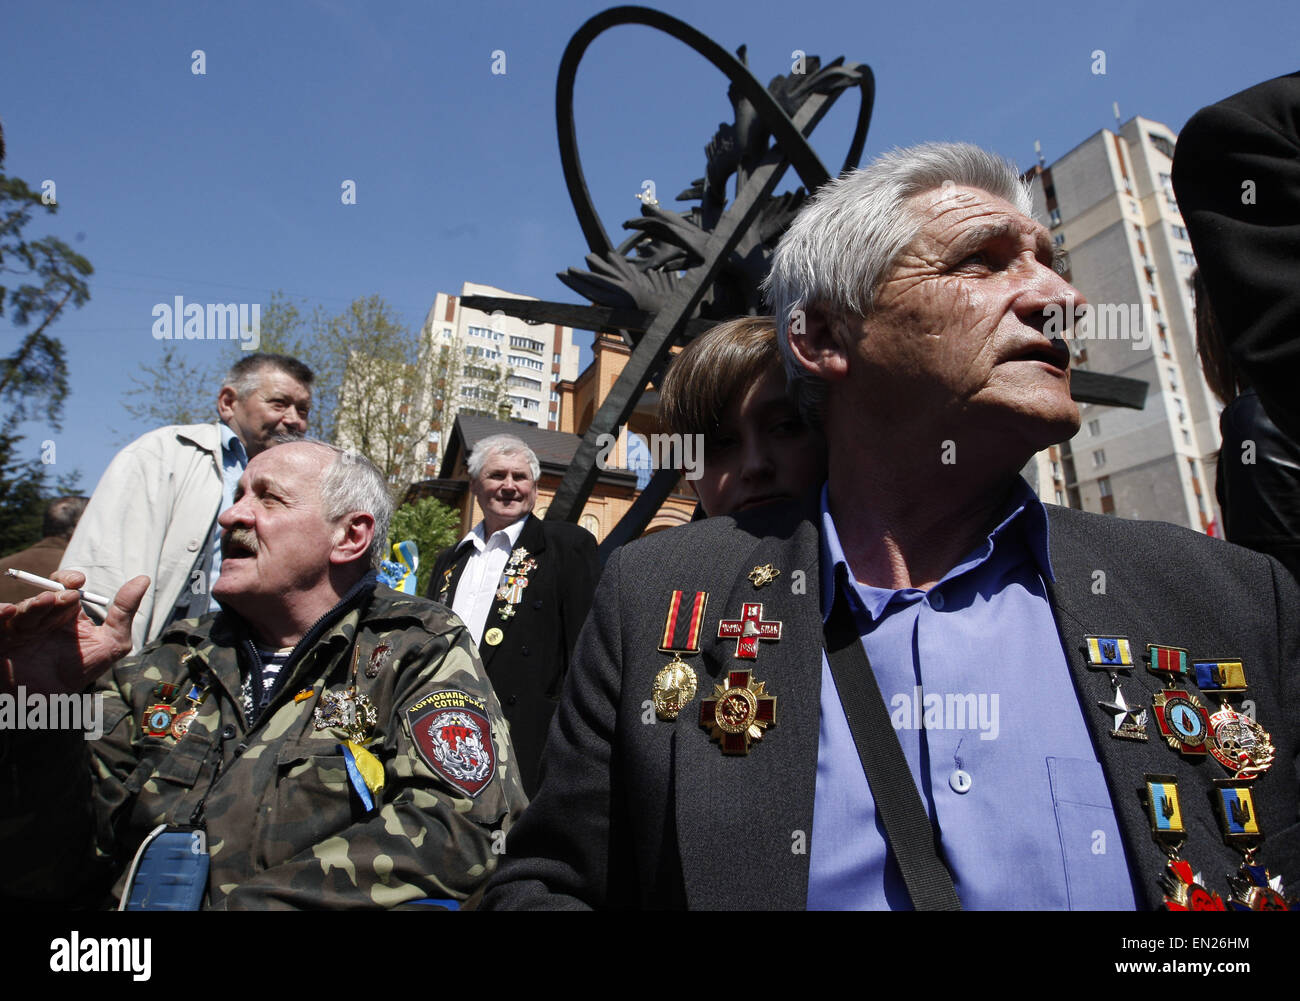 Kiev, Ukraine. 26th Apr, 2015. A former liquidators of the Chernobyl nuclear accident attends a commemoration ceremony at the Chernobyl victims' memorial in the Ukrainian capital of Kiev on April 26, 2015. The world marks the 29th anniversary of the world's worst nuclear disaster at Chernobyl nuclear pant in Ukraine. The explosion at reactor number four of the Chernobyl power plant in the early hours of April 26, 1986 sent radioactive fallout into the atmosphere that spread from the Soviet Union across Europe. © Serg Glovny/ZUMA Wire/ZUMAPRESS.com/Alamy Live News Stock Photo